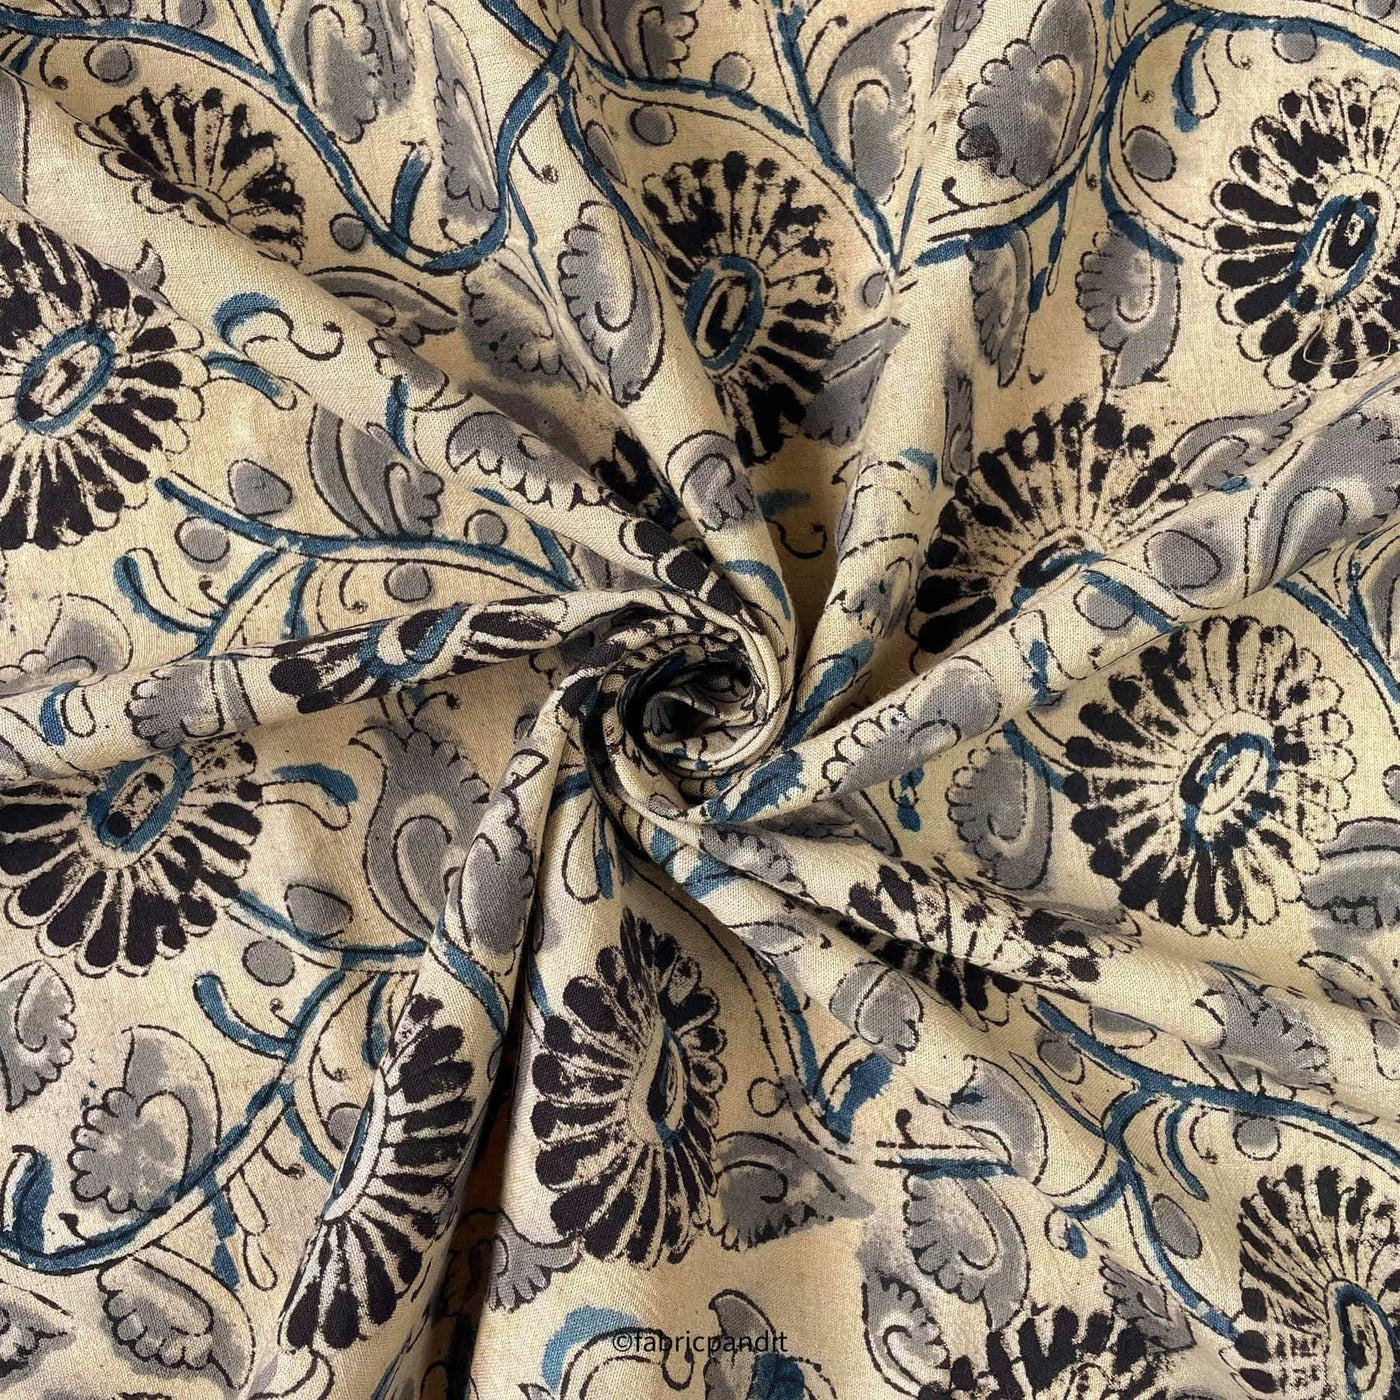 Fabric Pandit Fabric Dusty Beige and Black Sunflower Vines Pure Ajrakh Natural Dyed Hand Block Printed Pure Cotton Fabric (Width 42 inches)